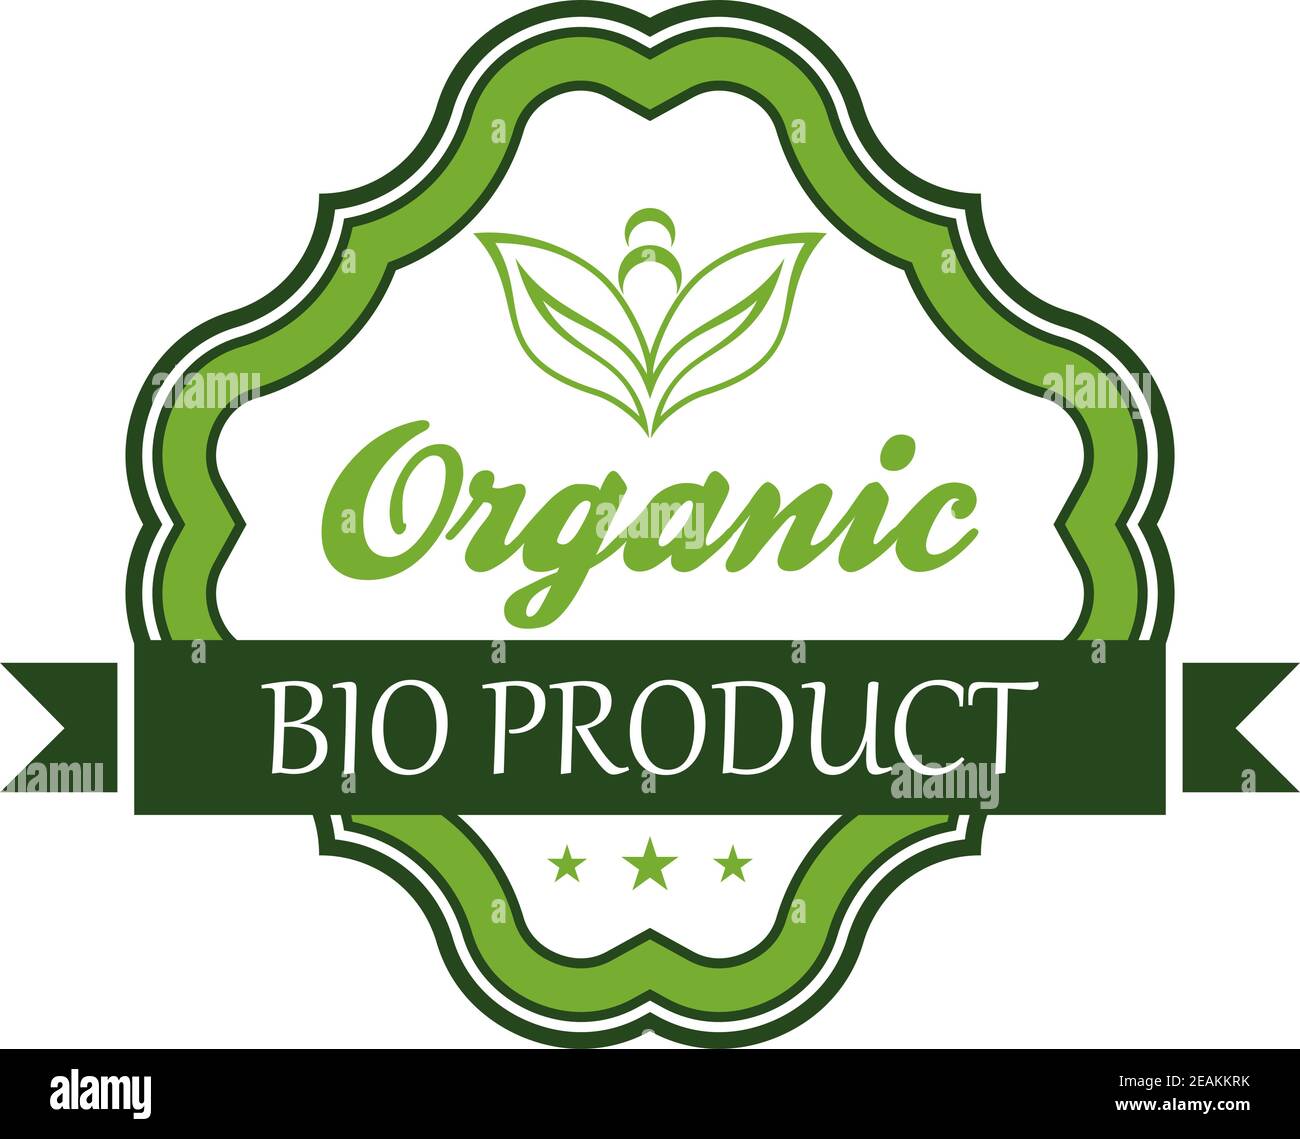 Organic bio product emblem or label in shades of green with an ornate cartouche enclosing the script - Organic - and a ribbon banner with the words - Stock Vector